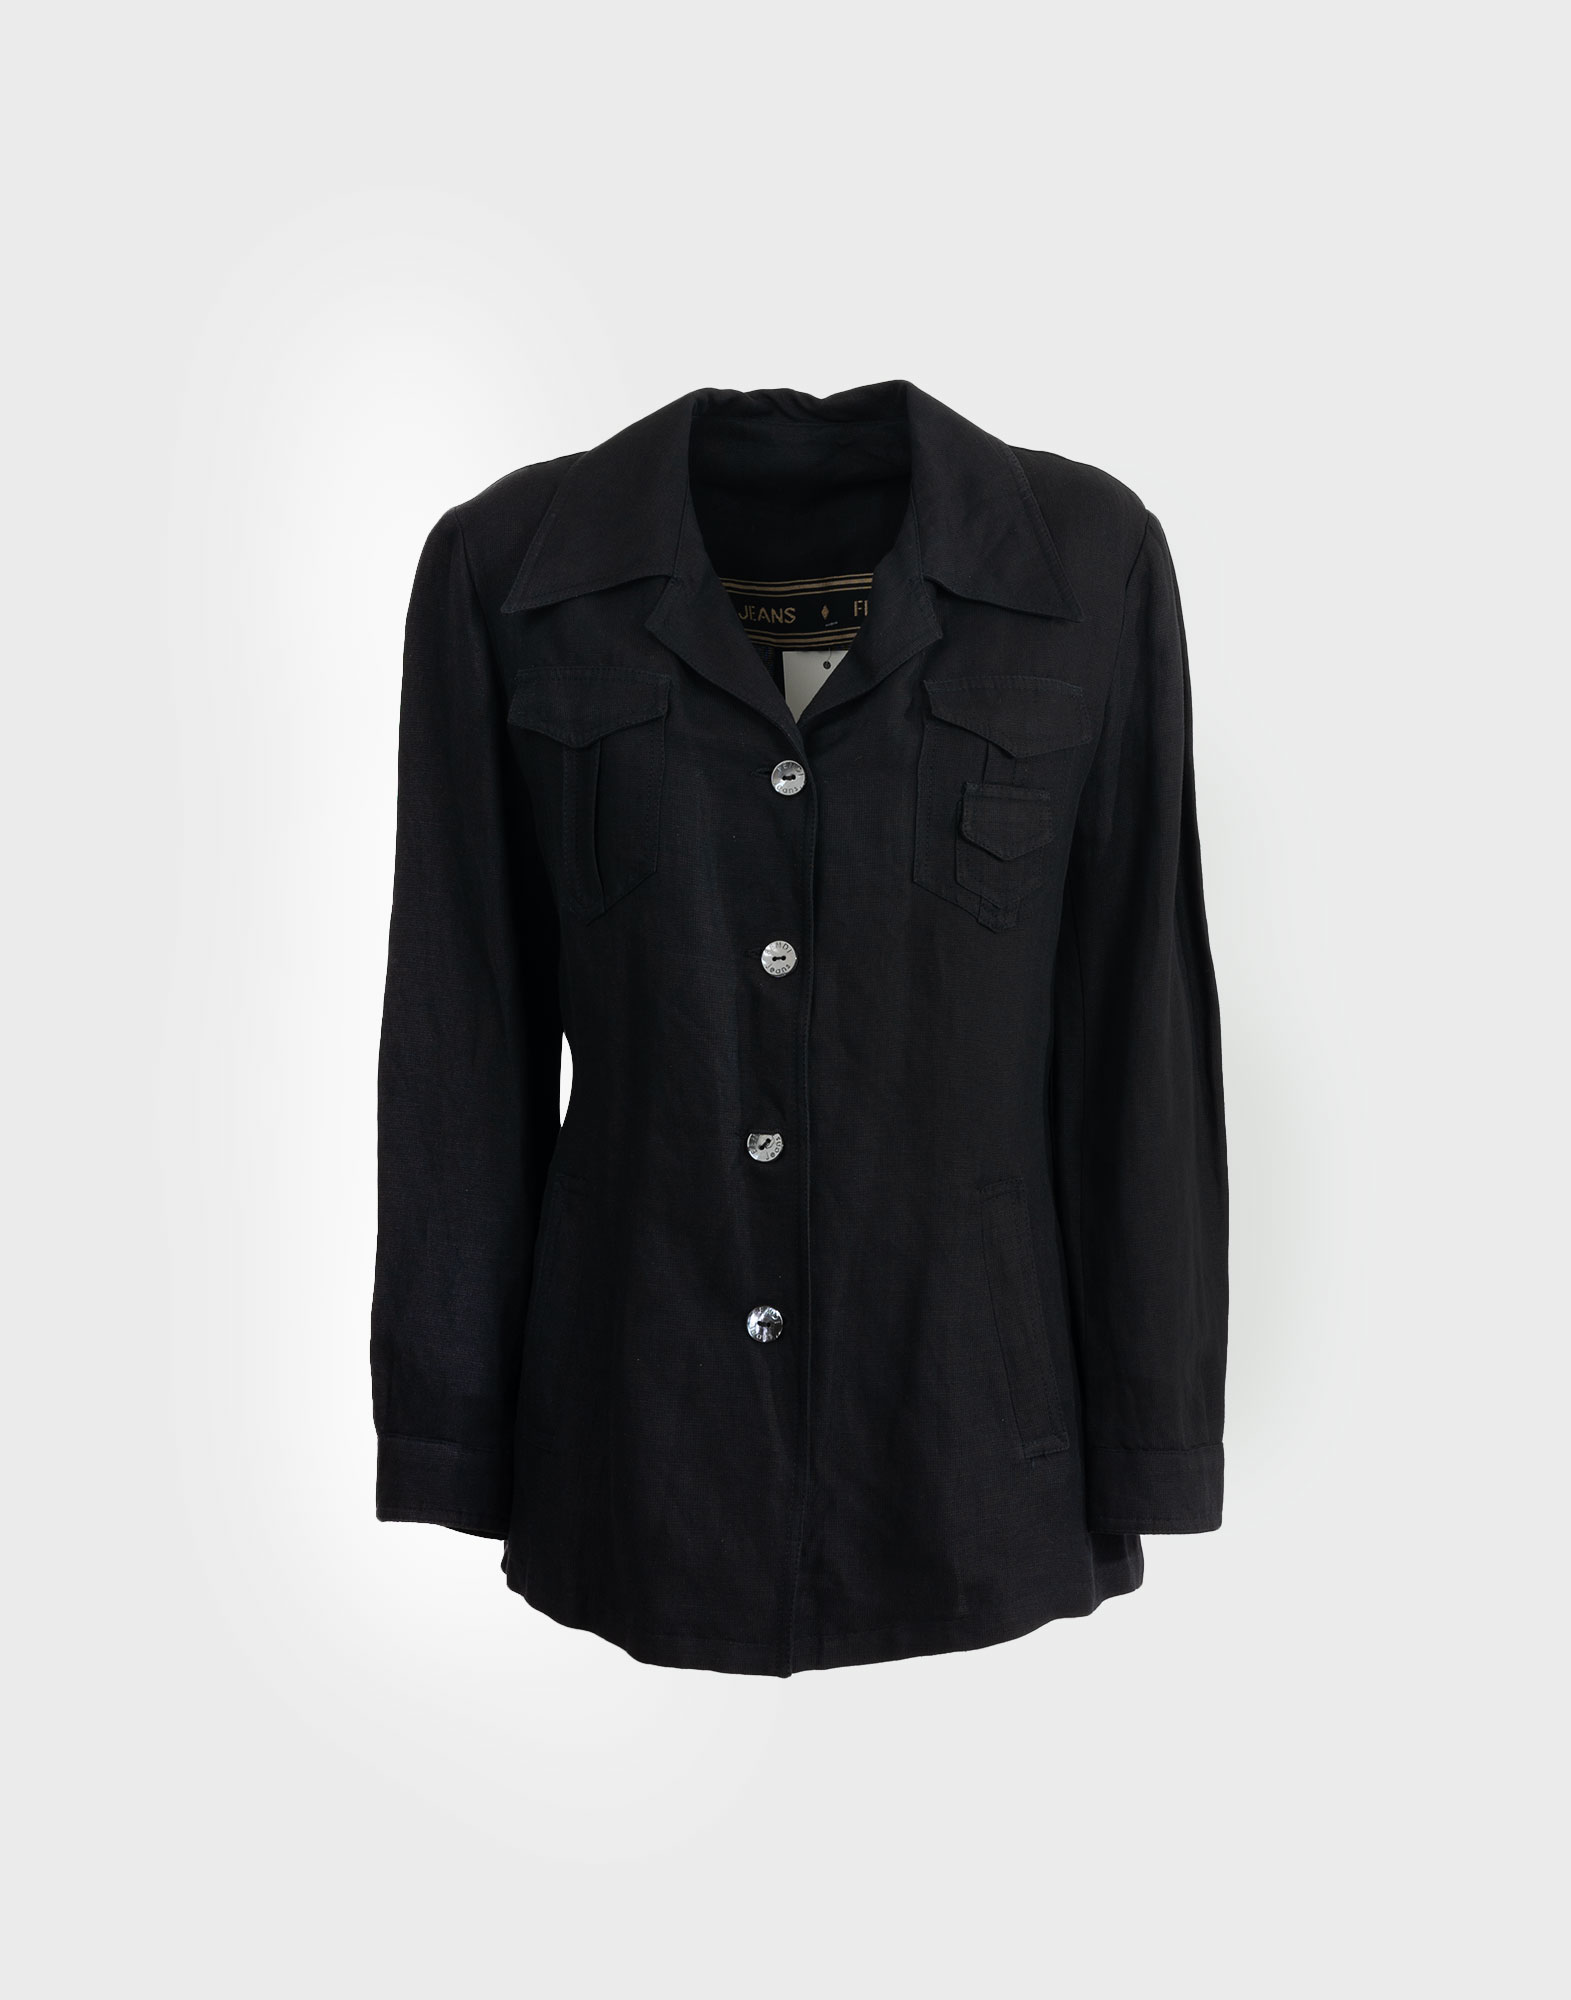 Black fendi shirt in viscose and linen with buttoning